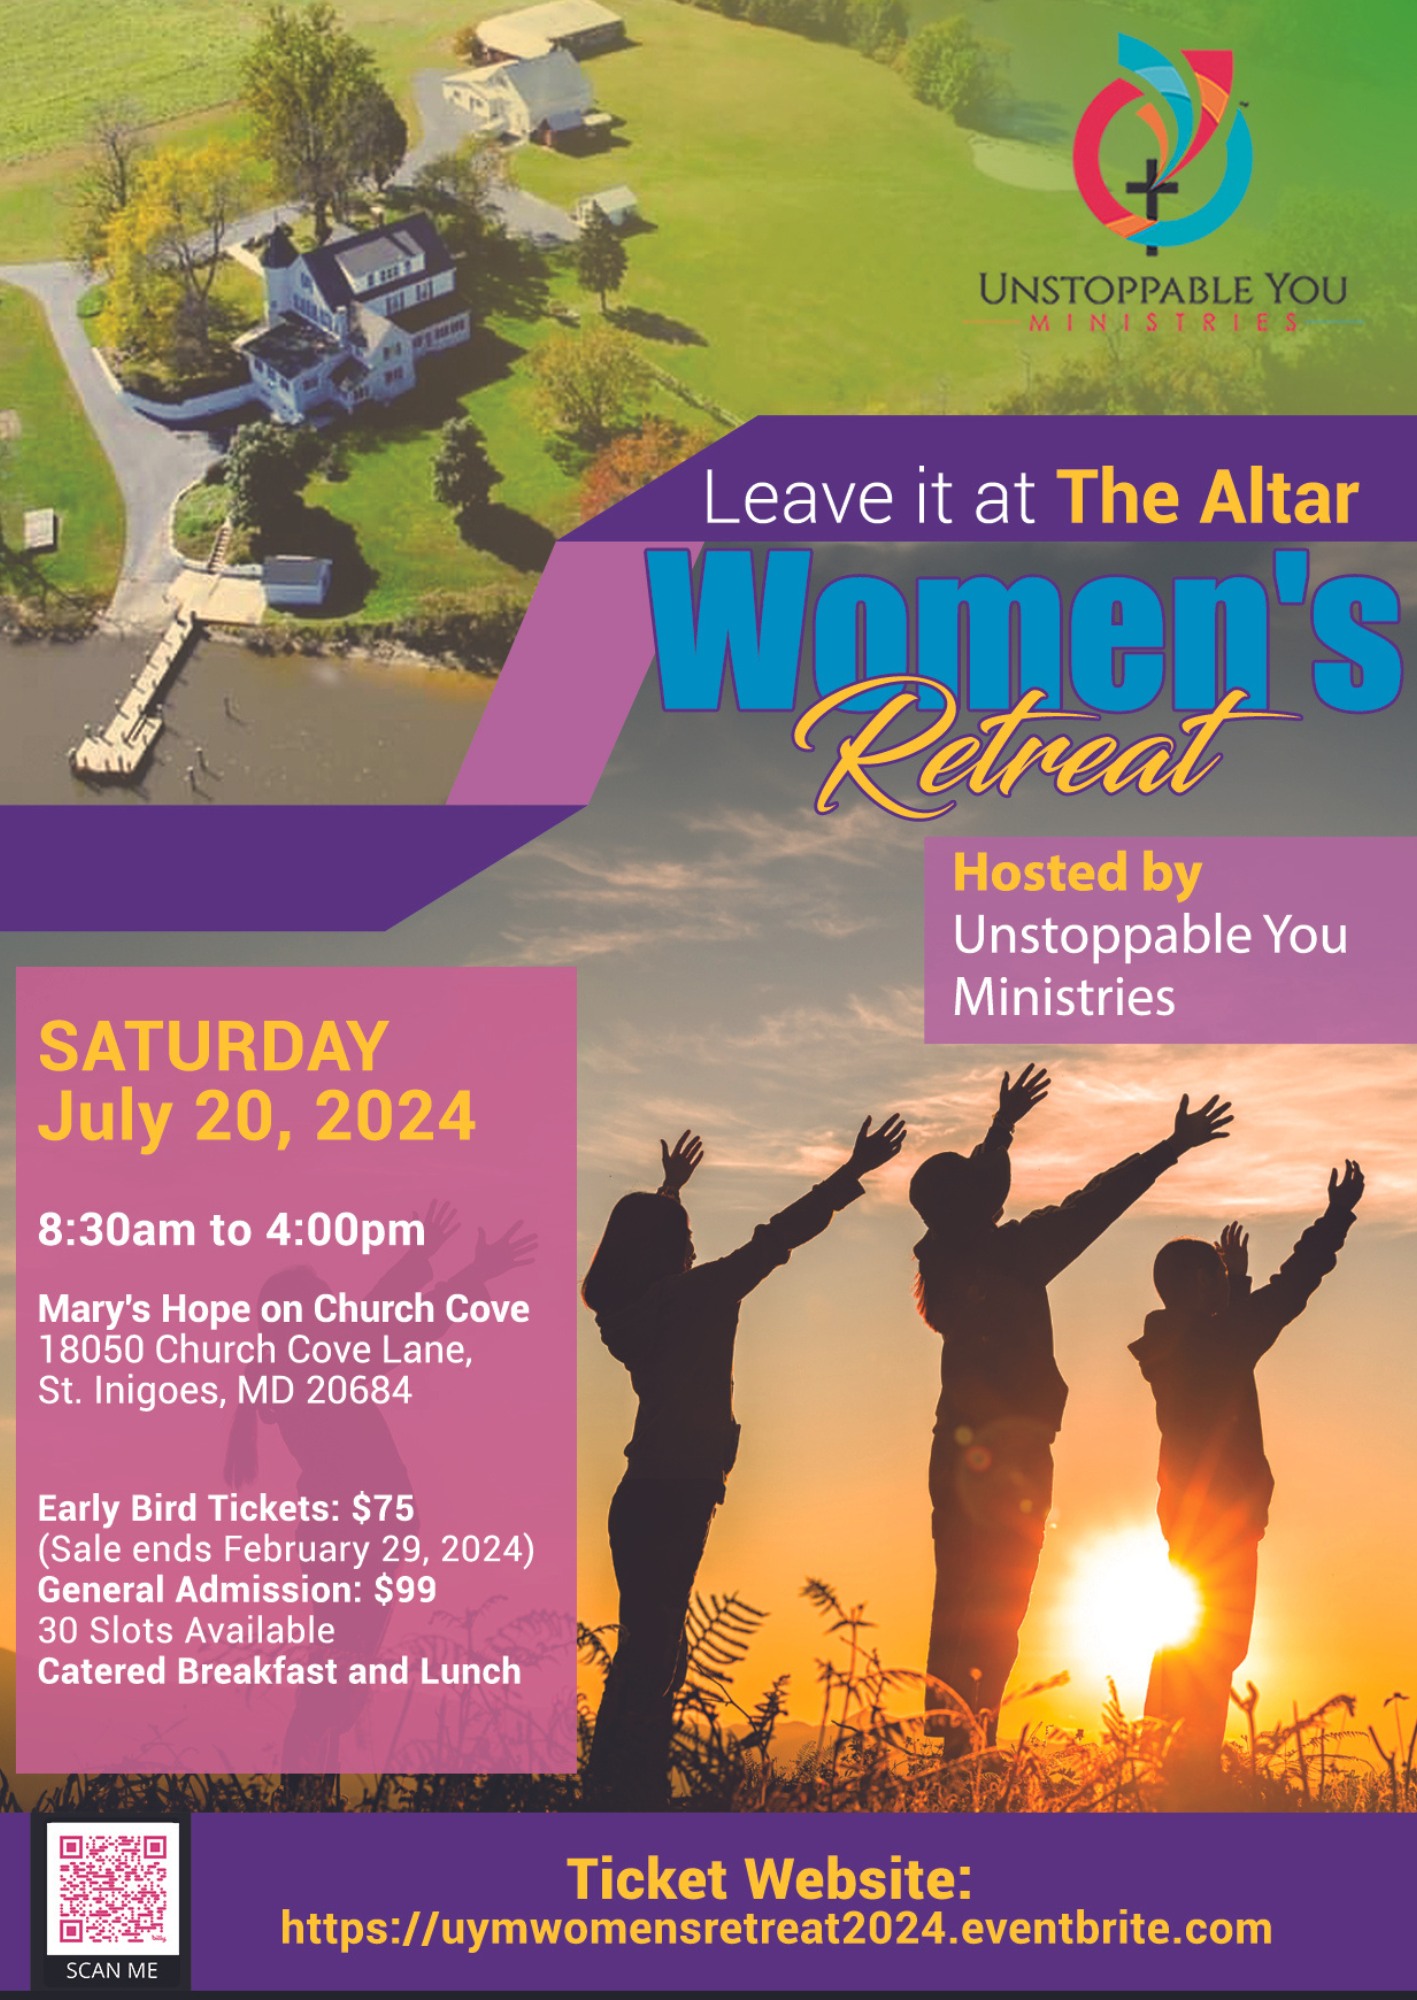 Leave it at the Alter Women's Retreat Flyer